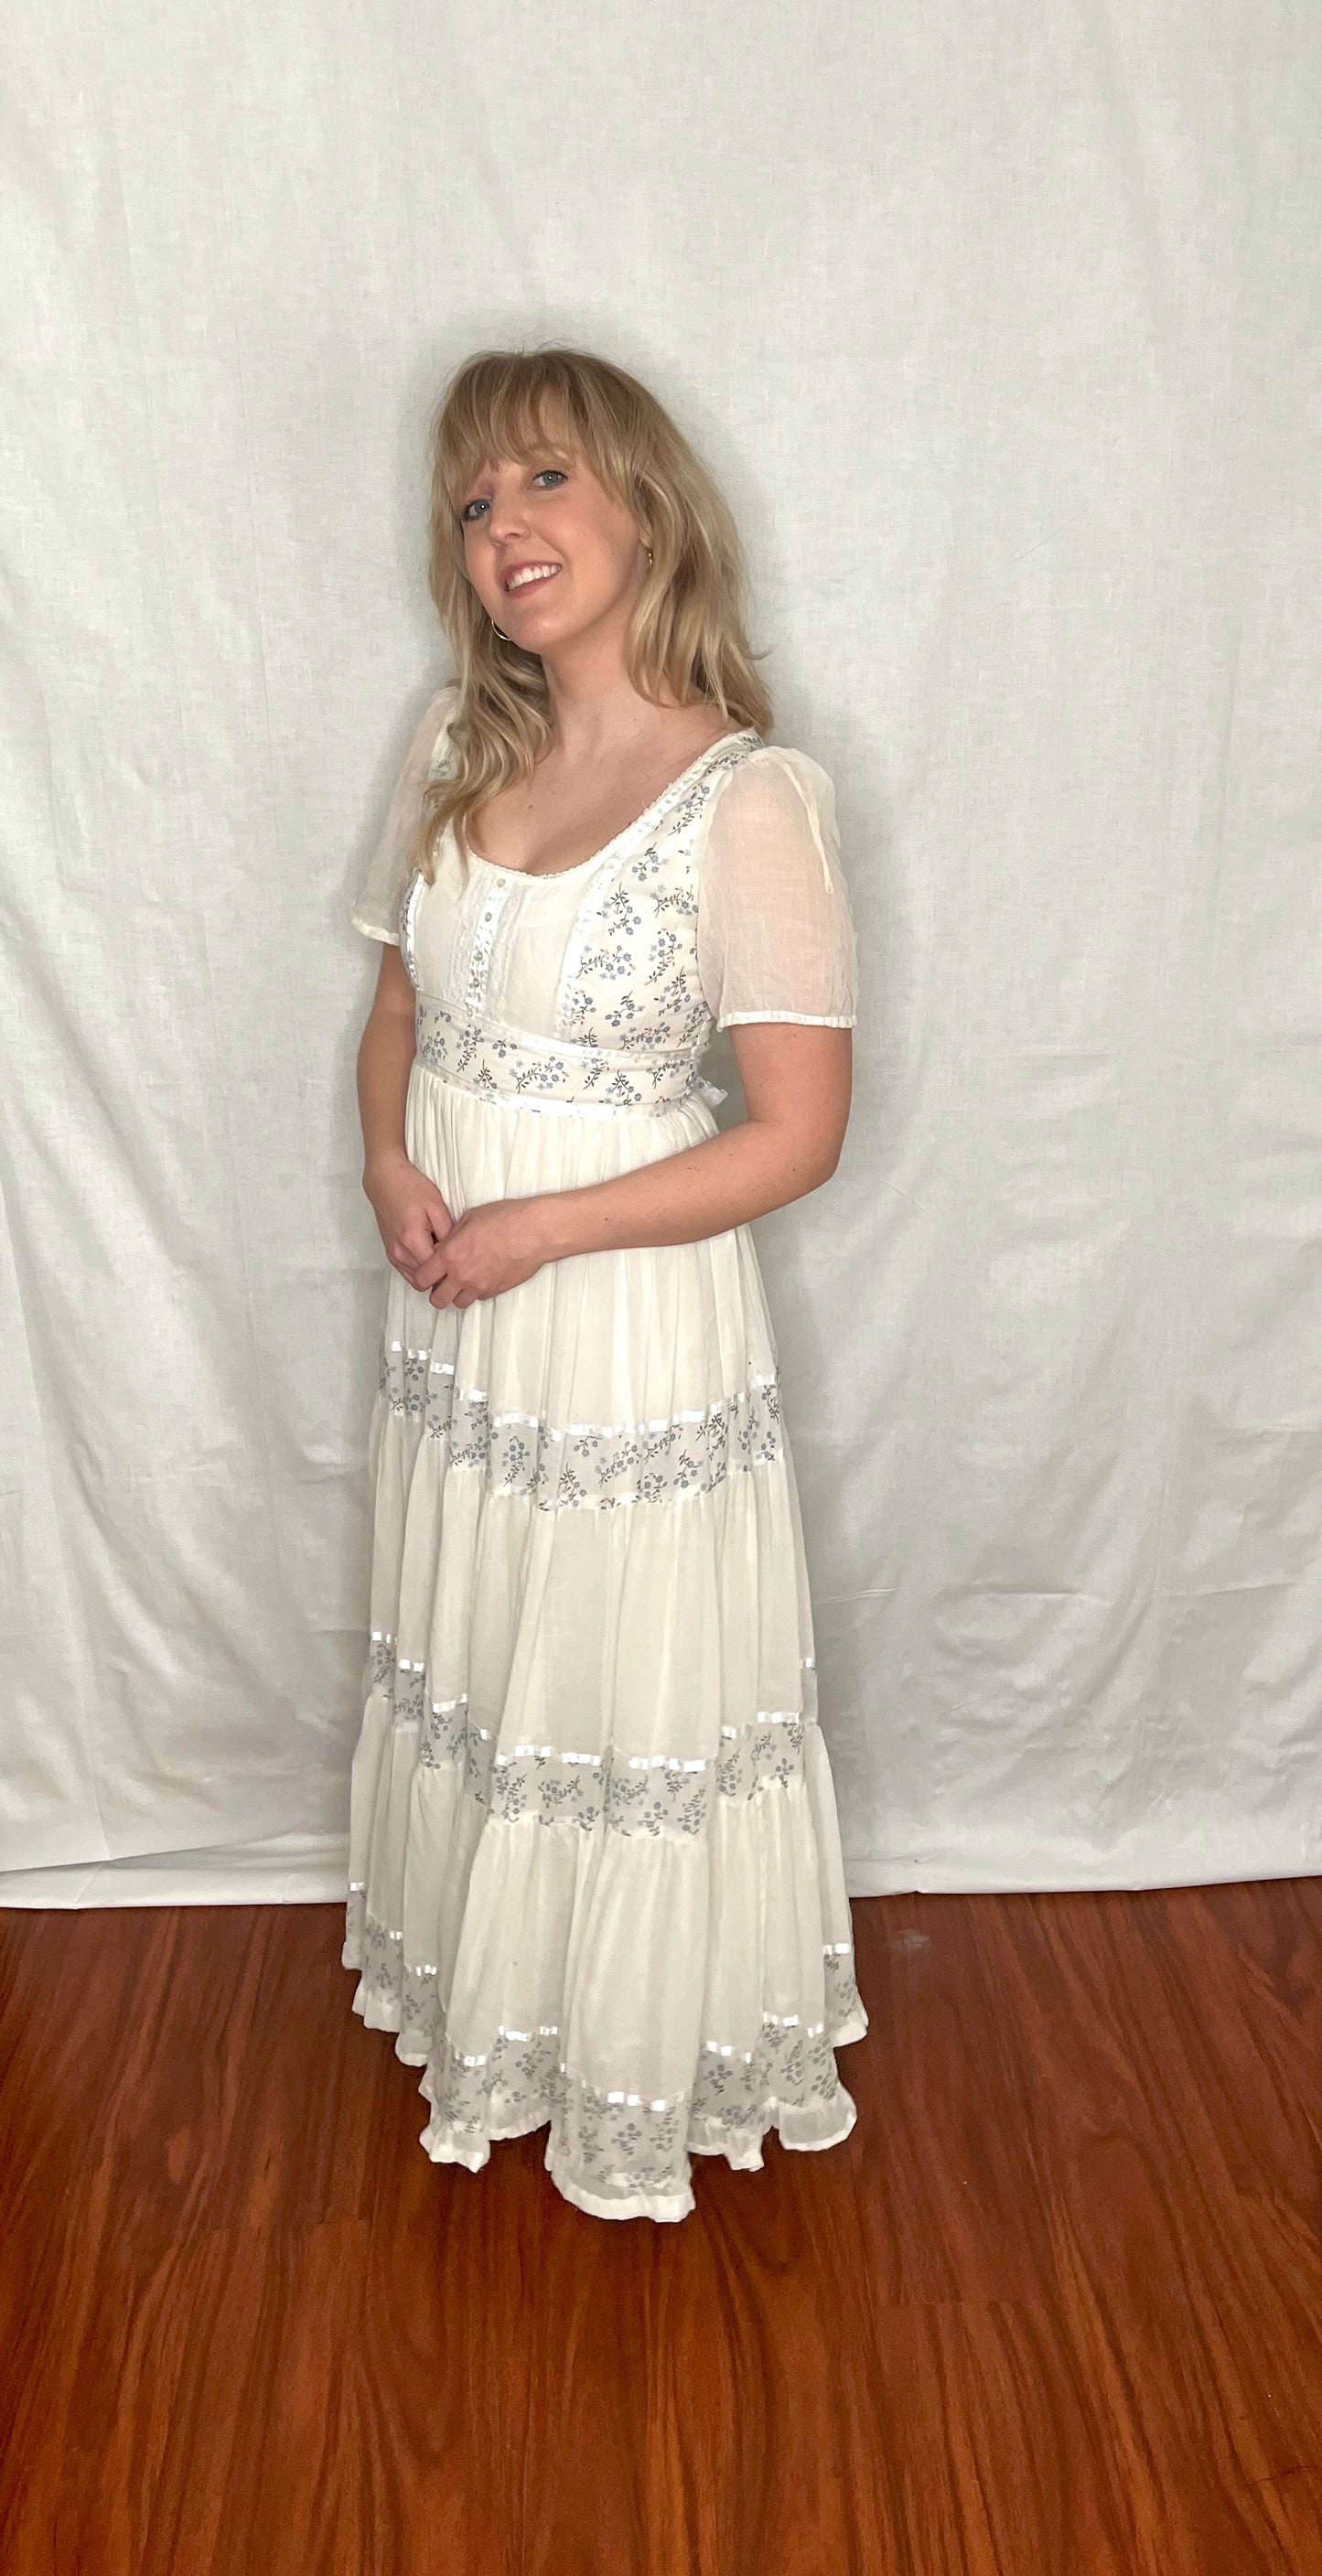 Vintage 1970’s "Gunne Sax by Jessica McClintock" White and Blue Floral Maxi Dress (Altered)